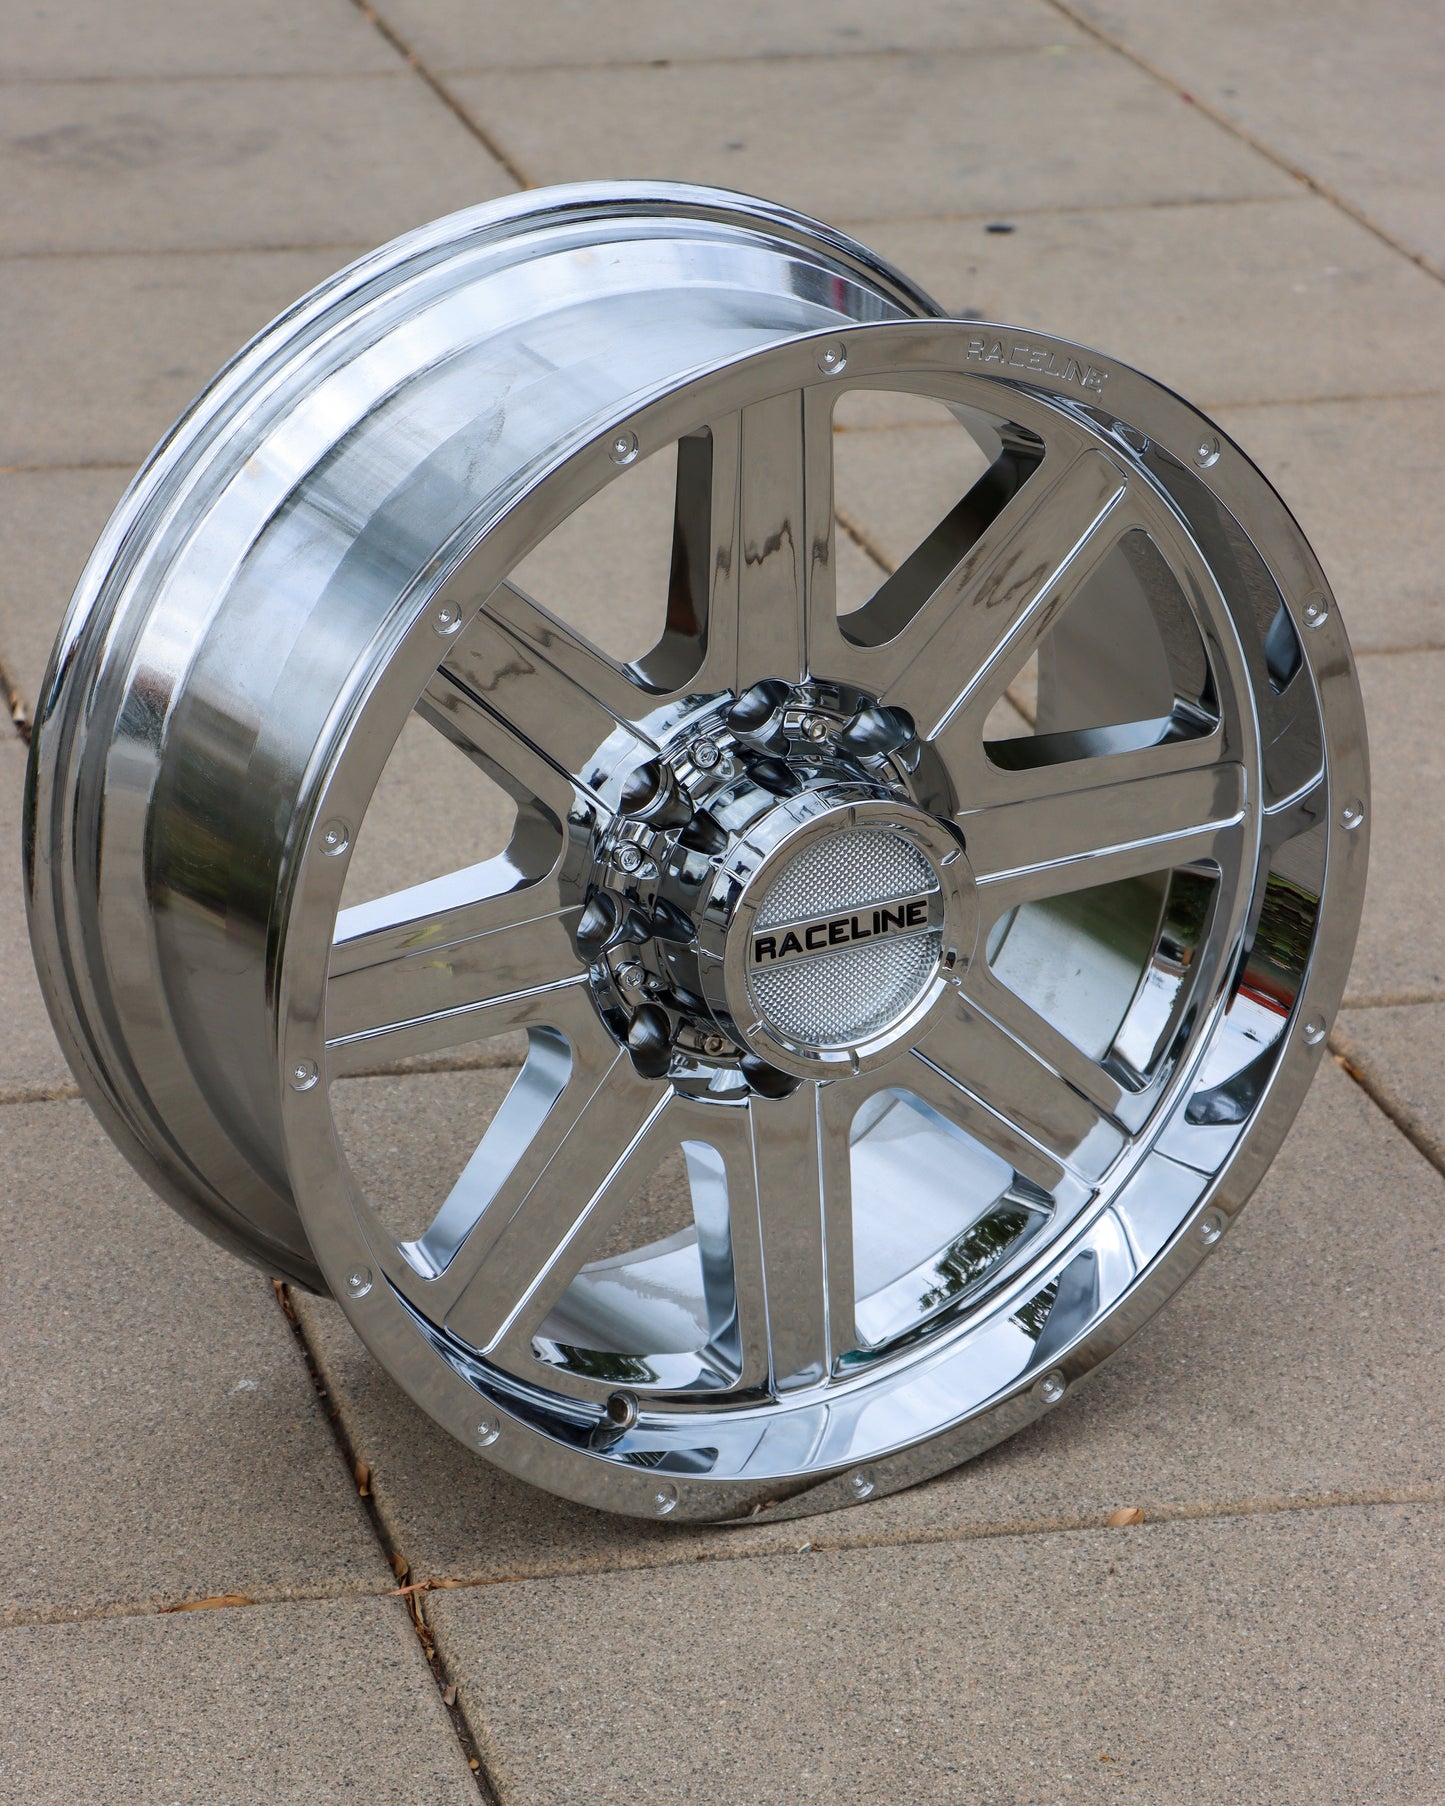 topside view the raceline hostage wheel in a chrome finish on the sidewalk.